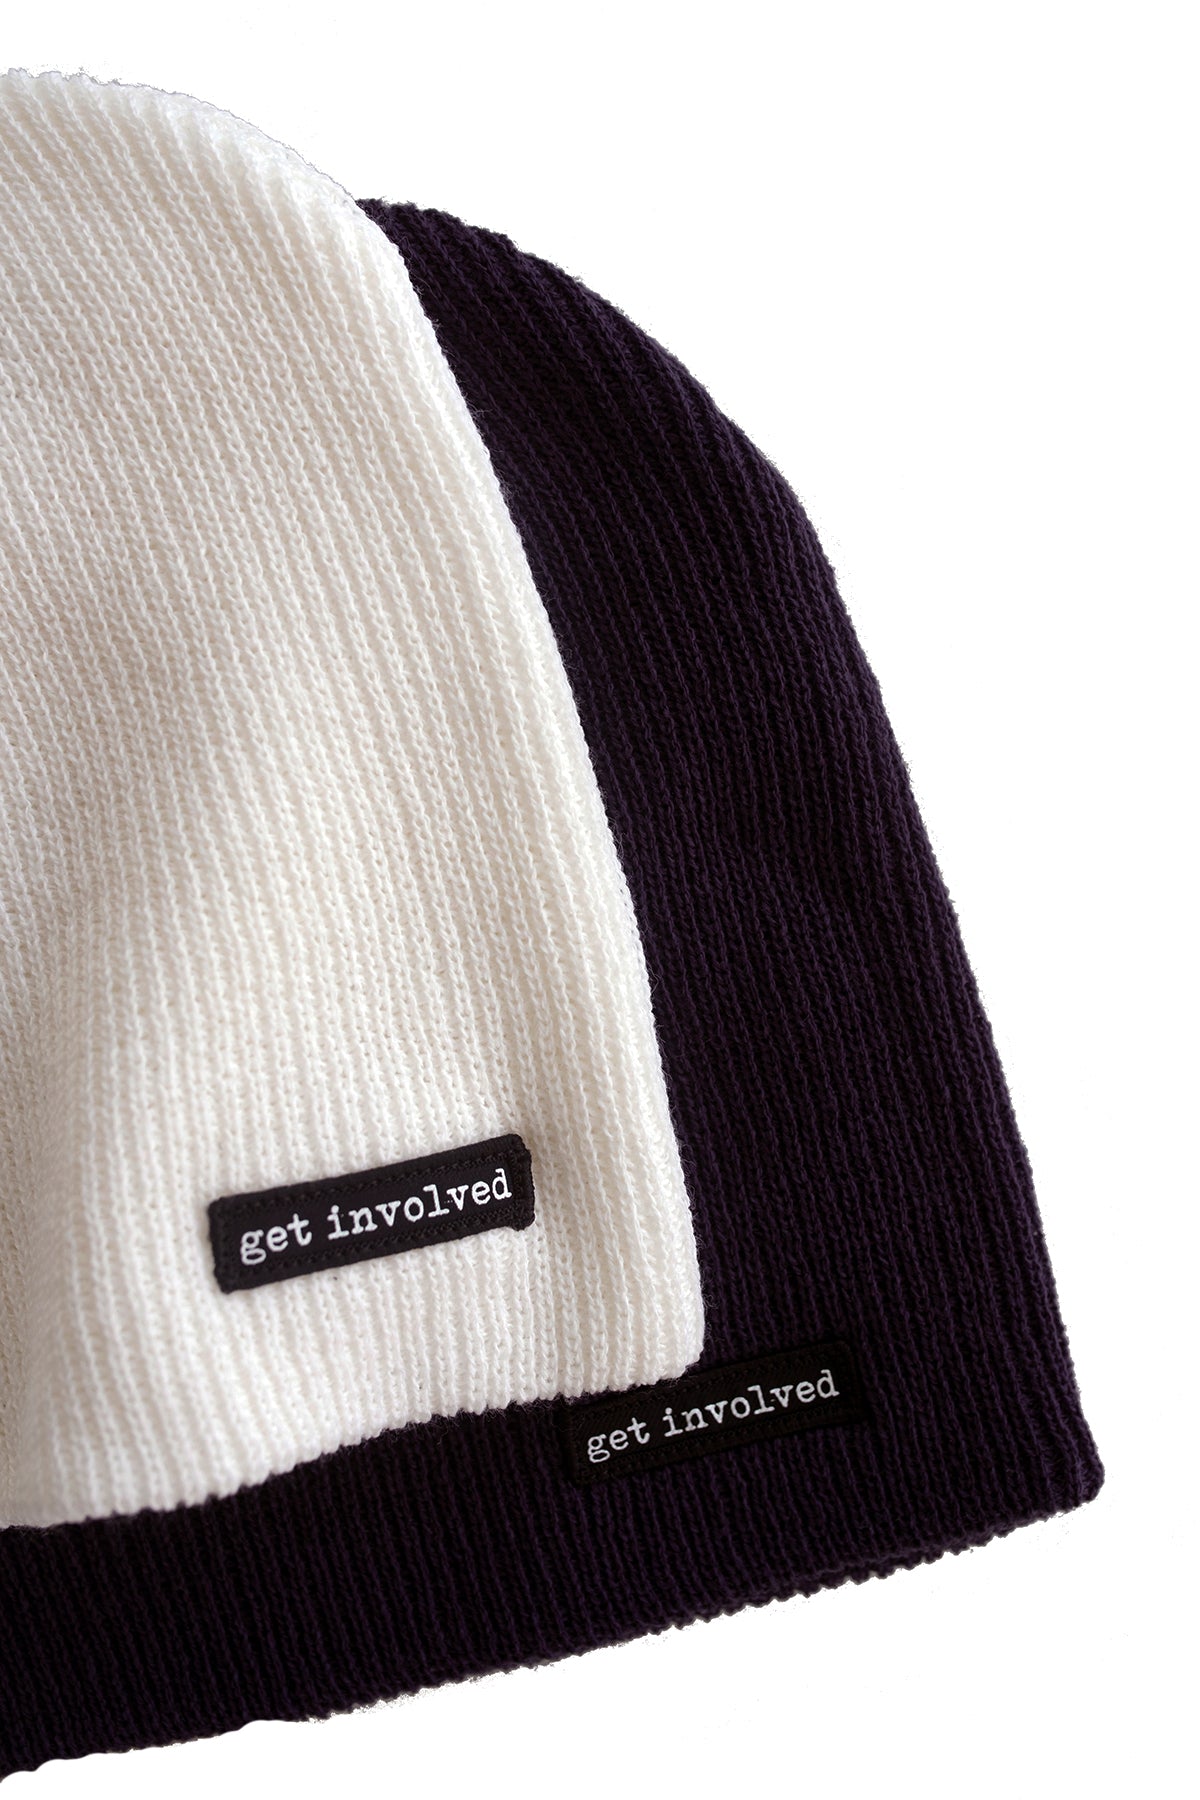 Super Soft Slouch Beanie - Get Involved